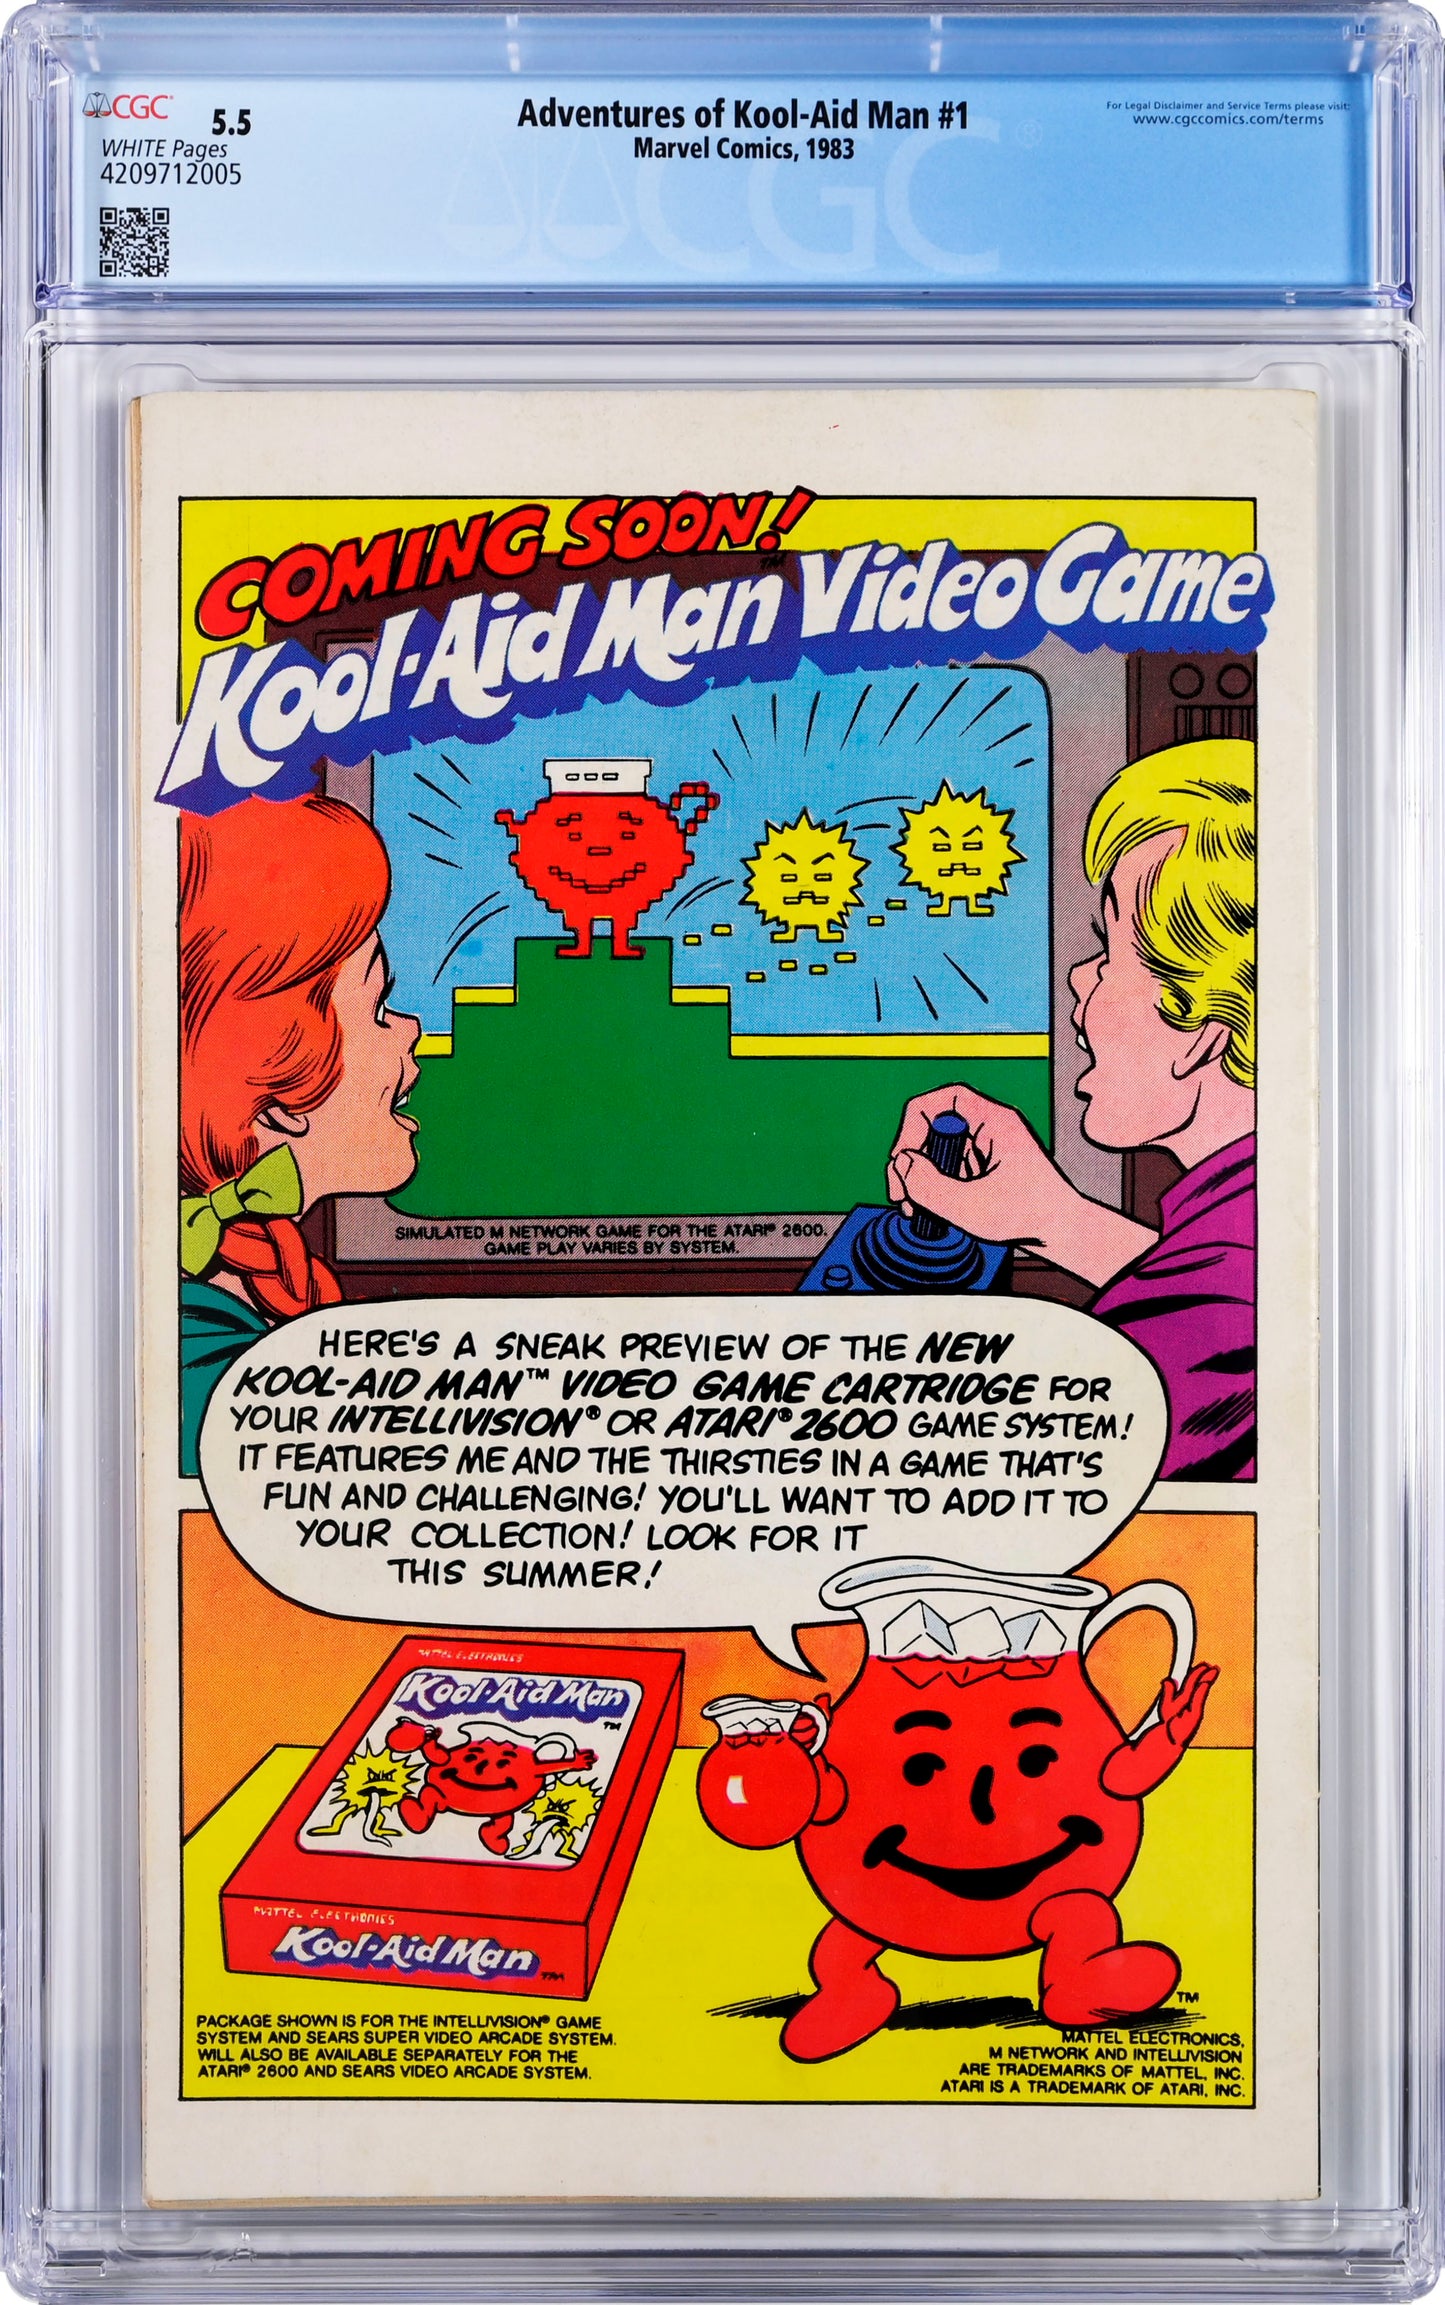 The Adventures of Kool-Aid Man #1 - CGC Graded 5.5 - Promotional Mail Order Variant